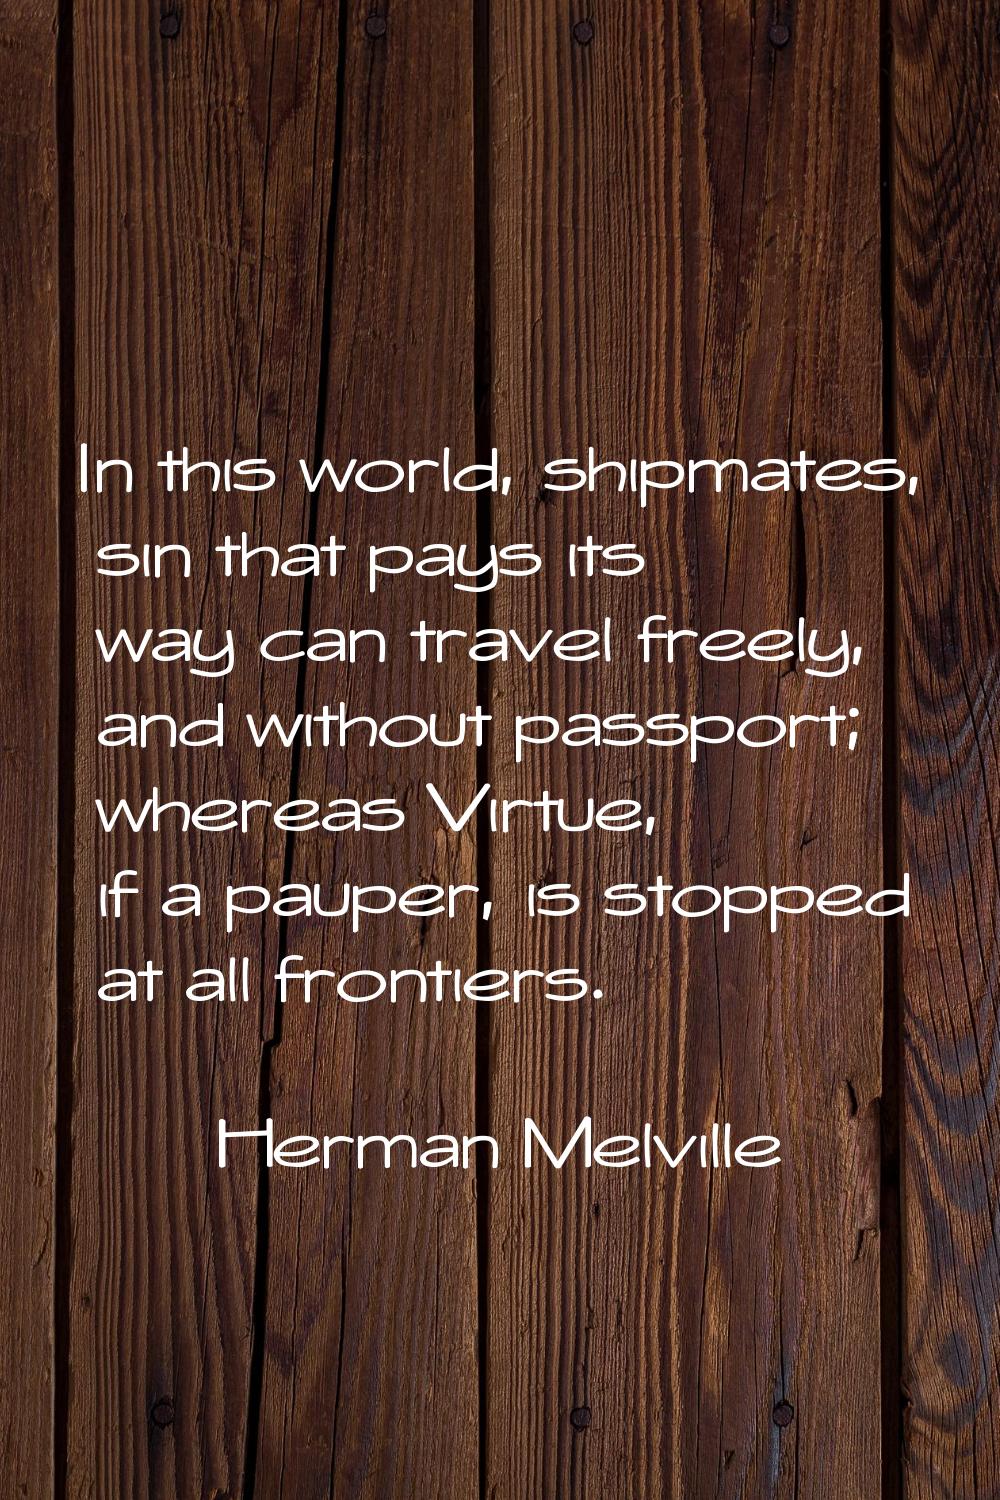 In this world, shipmates, sin that pays its way can travel freely, and without passport; whereas Vi